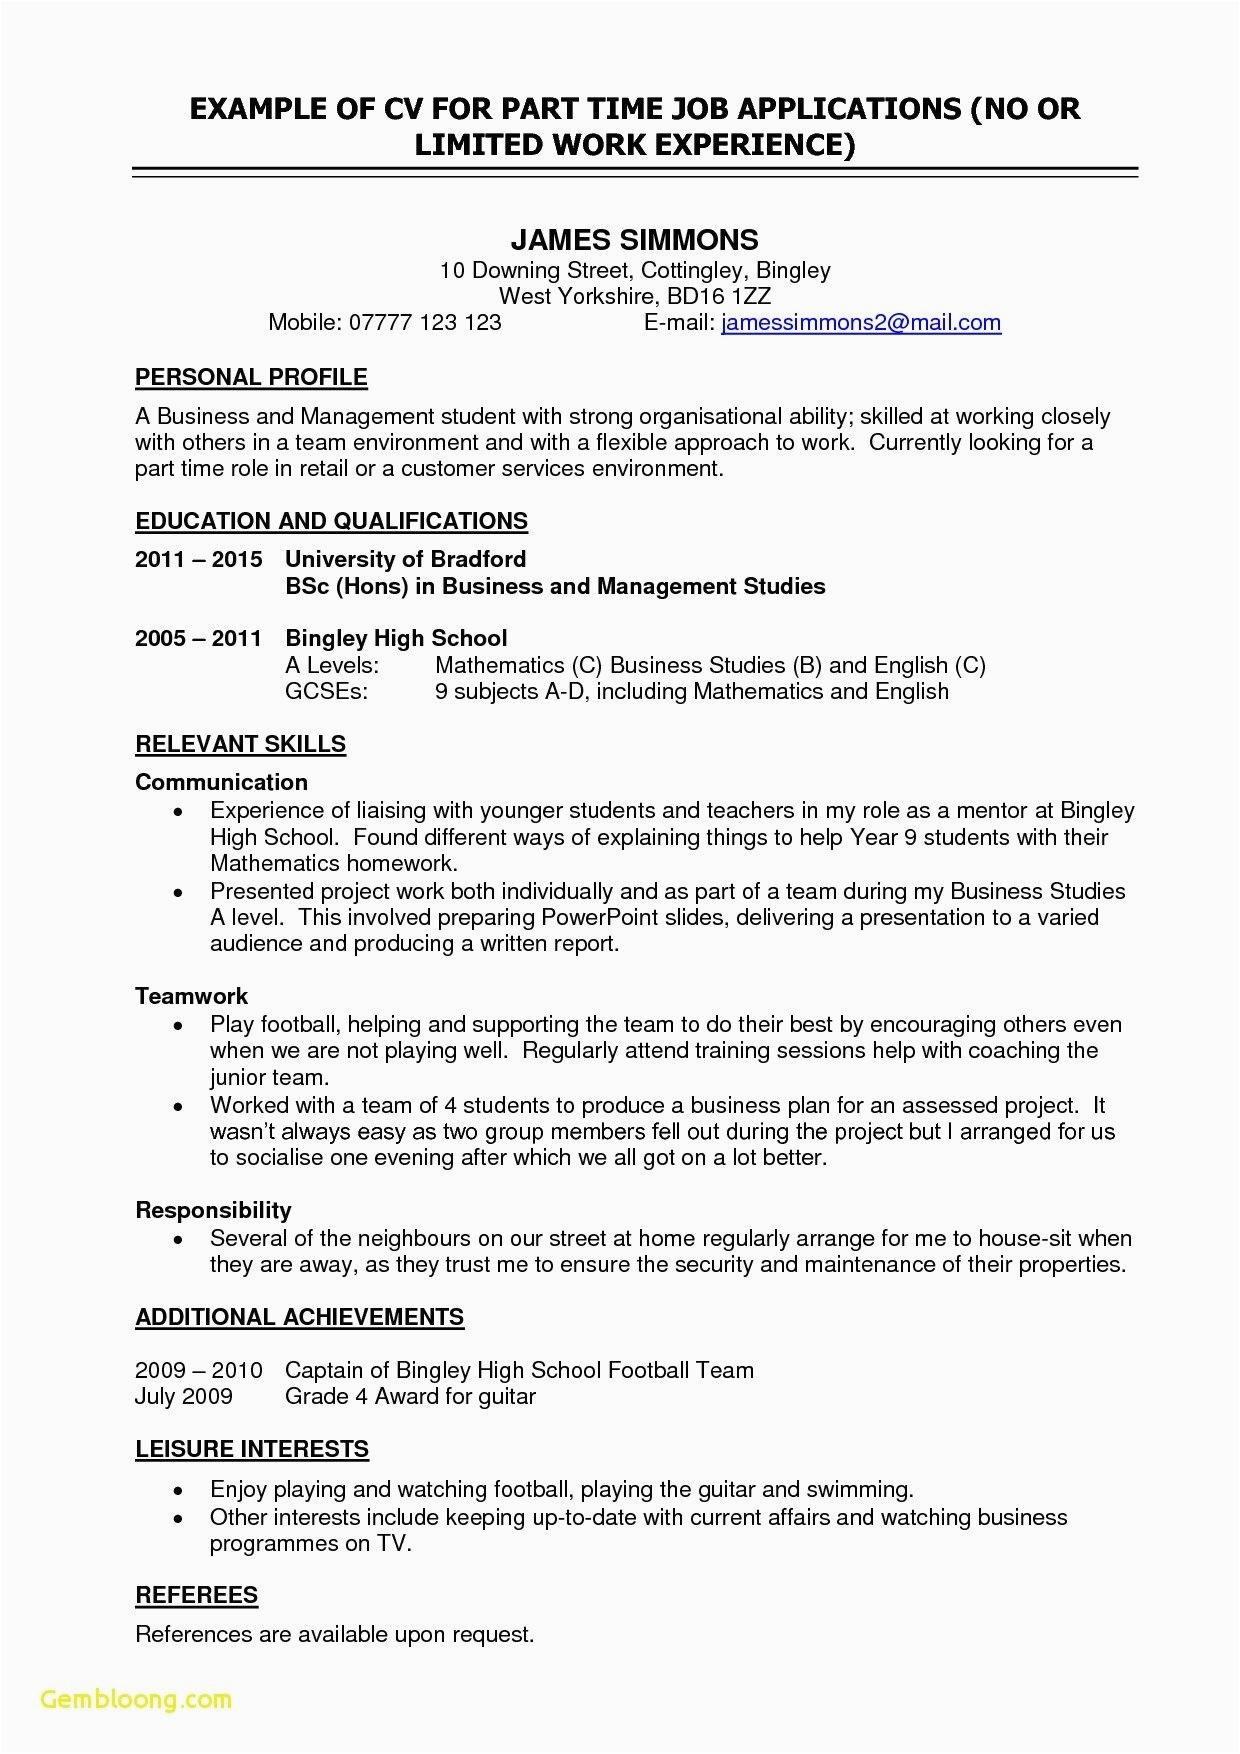 Sample Resume for Part Time Job with No Experience 75 Inspiring S Resume Examples for Students with